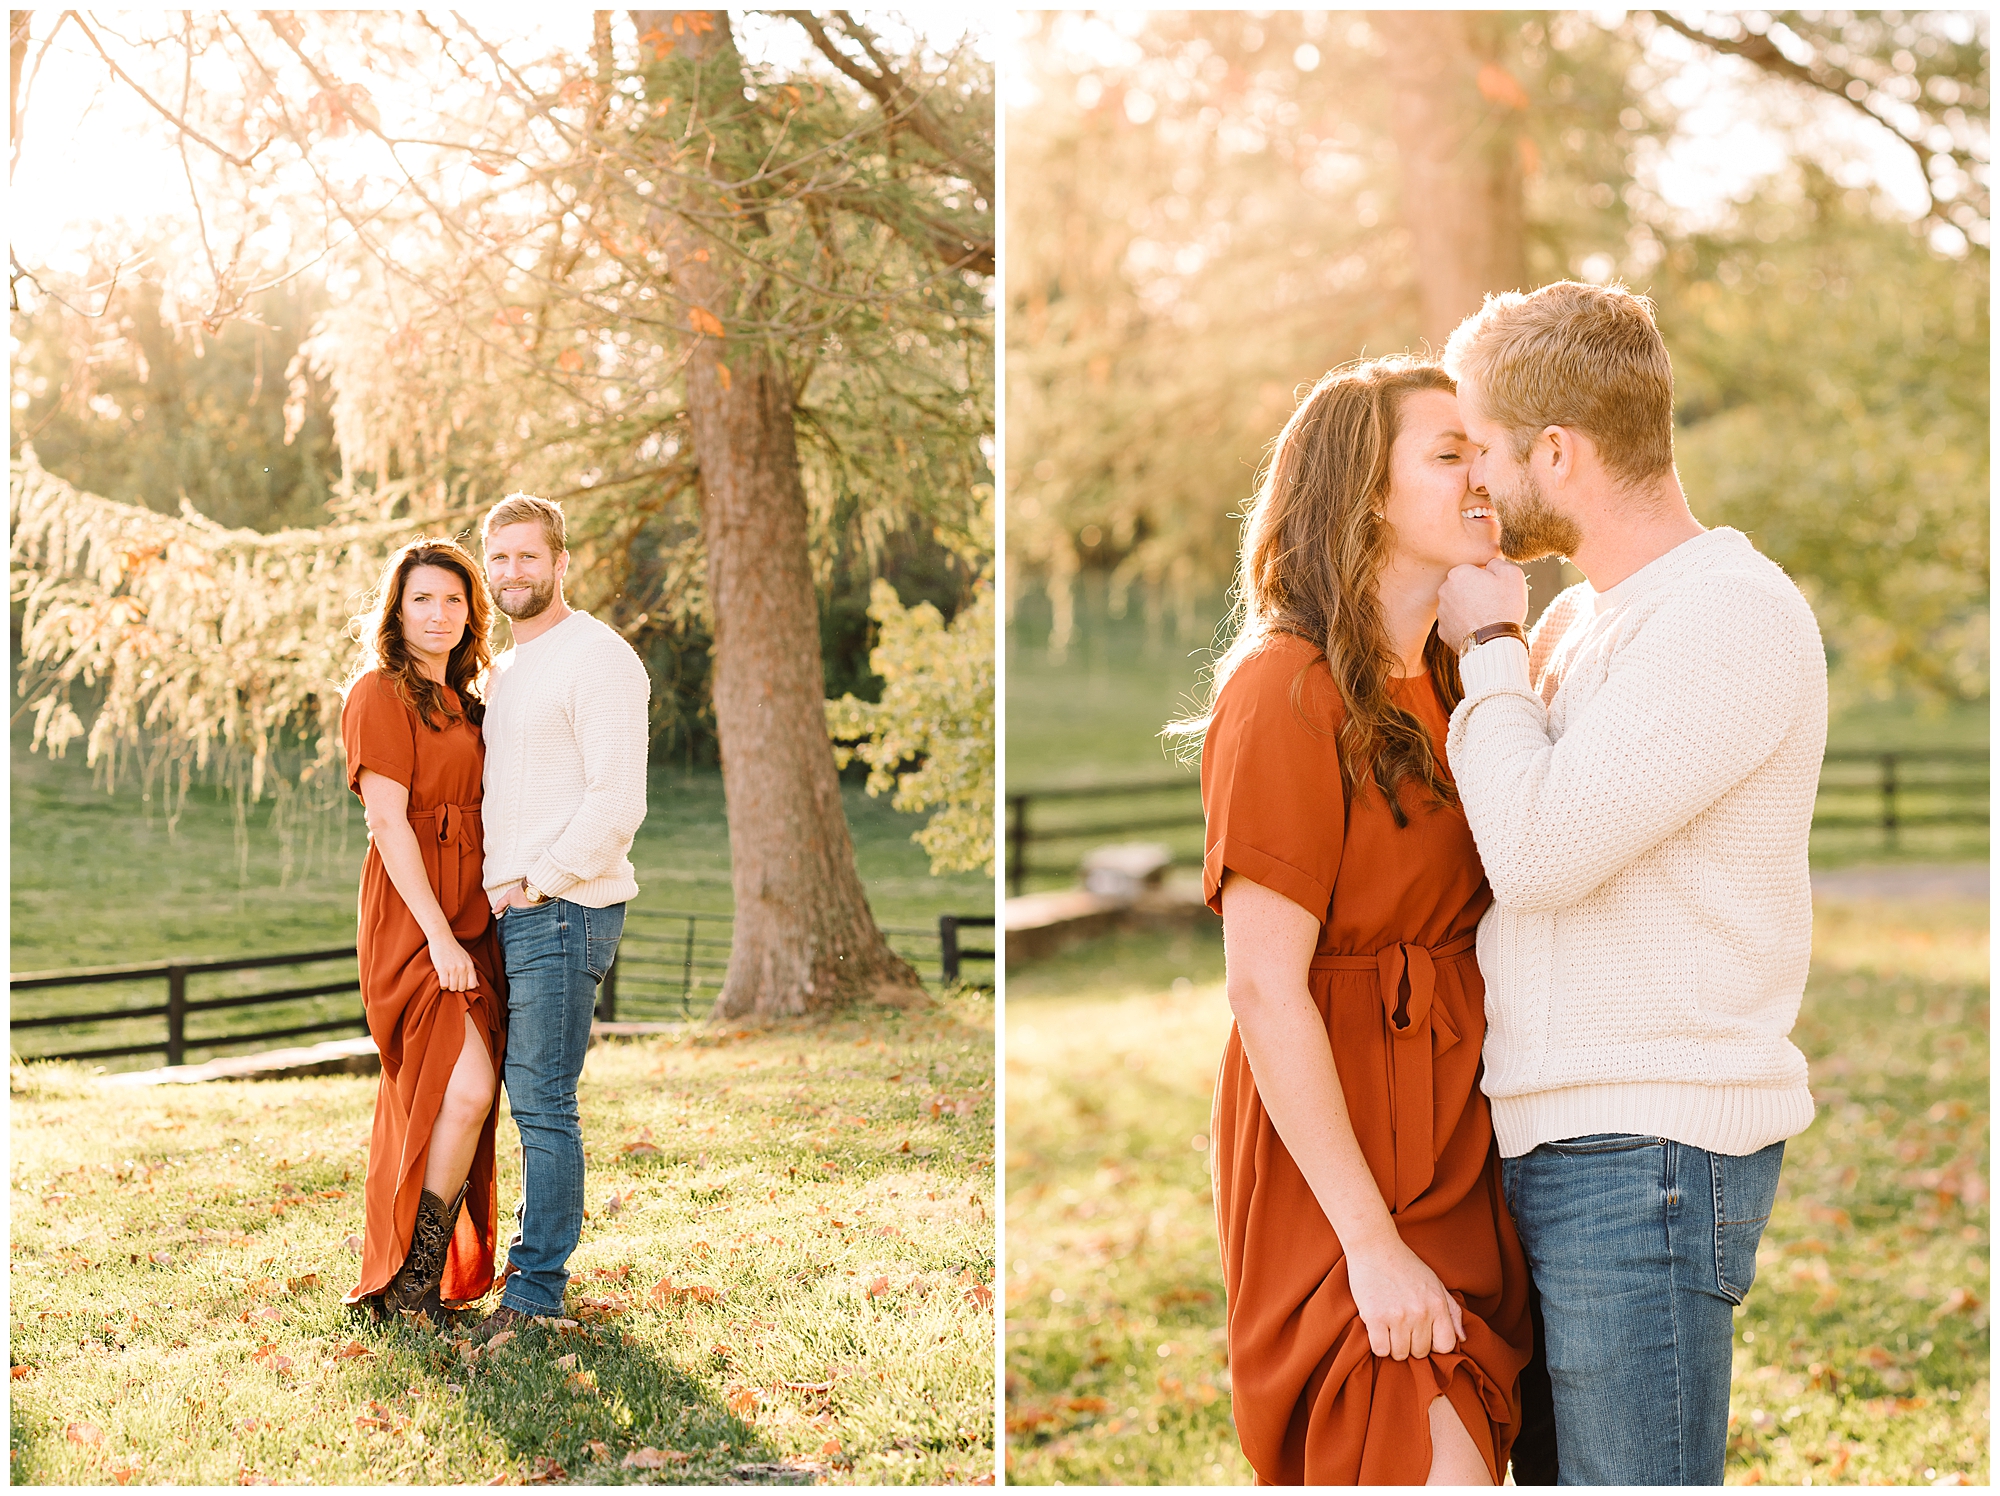 KrystaNormanPhoto_Intimate_Fall_Couples_Session_Purcellville_Virginia_Photographer_Krysta_Norman_0013.jpg